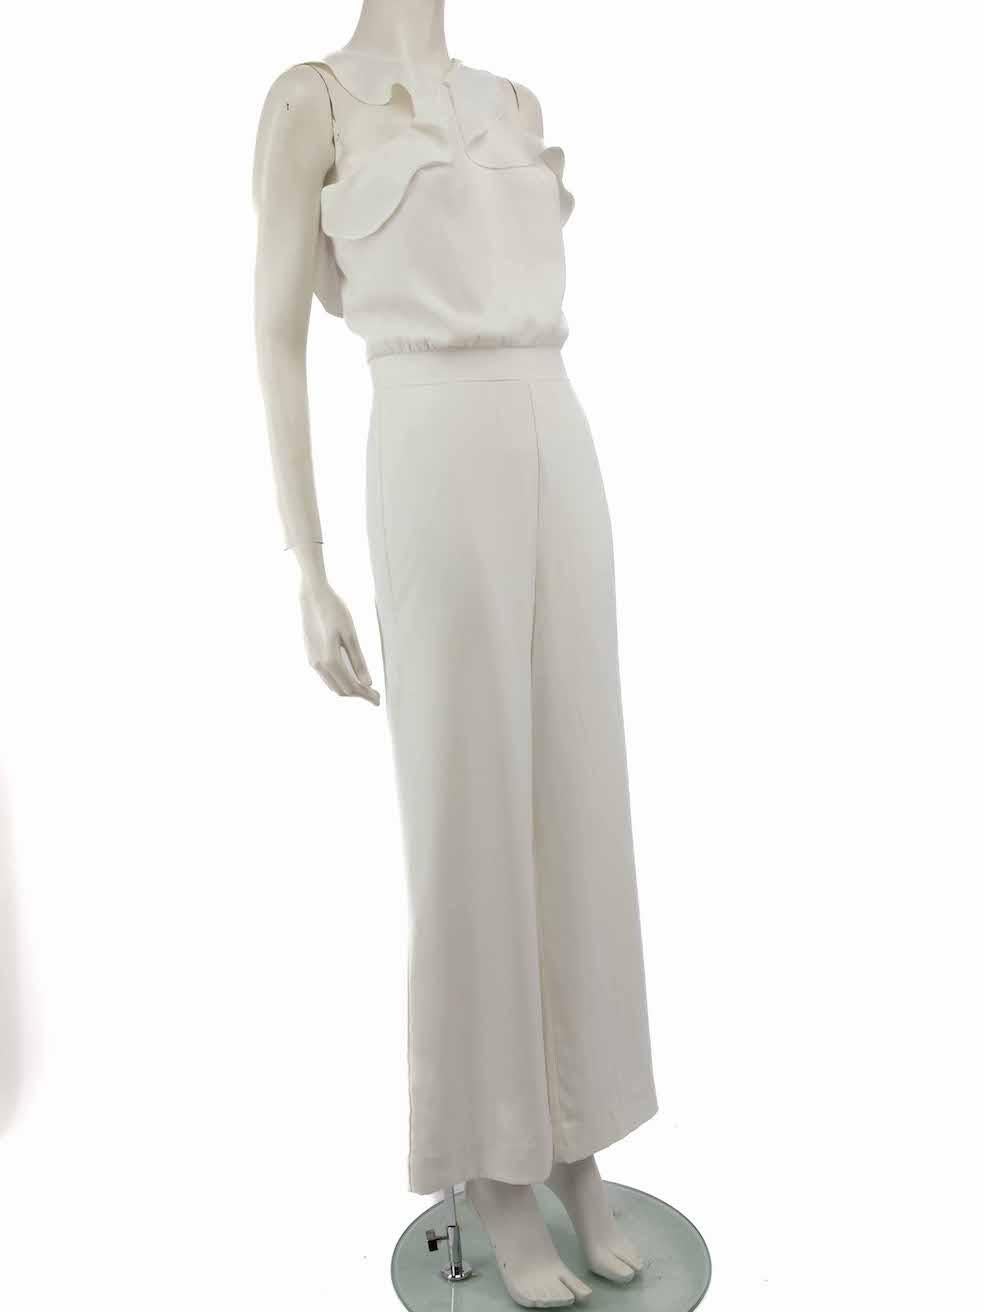 CONDITION is Good. General wear to jumpsuit is evident. Moderate signs of discoloured marks to ruffles, front waistline, front right leg, back waist and back of both legs. The eye of the back fastening and composition label is missing on this used